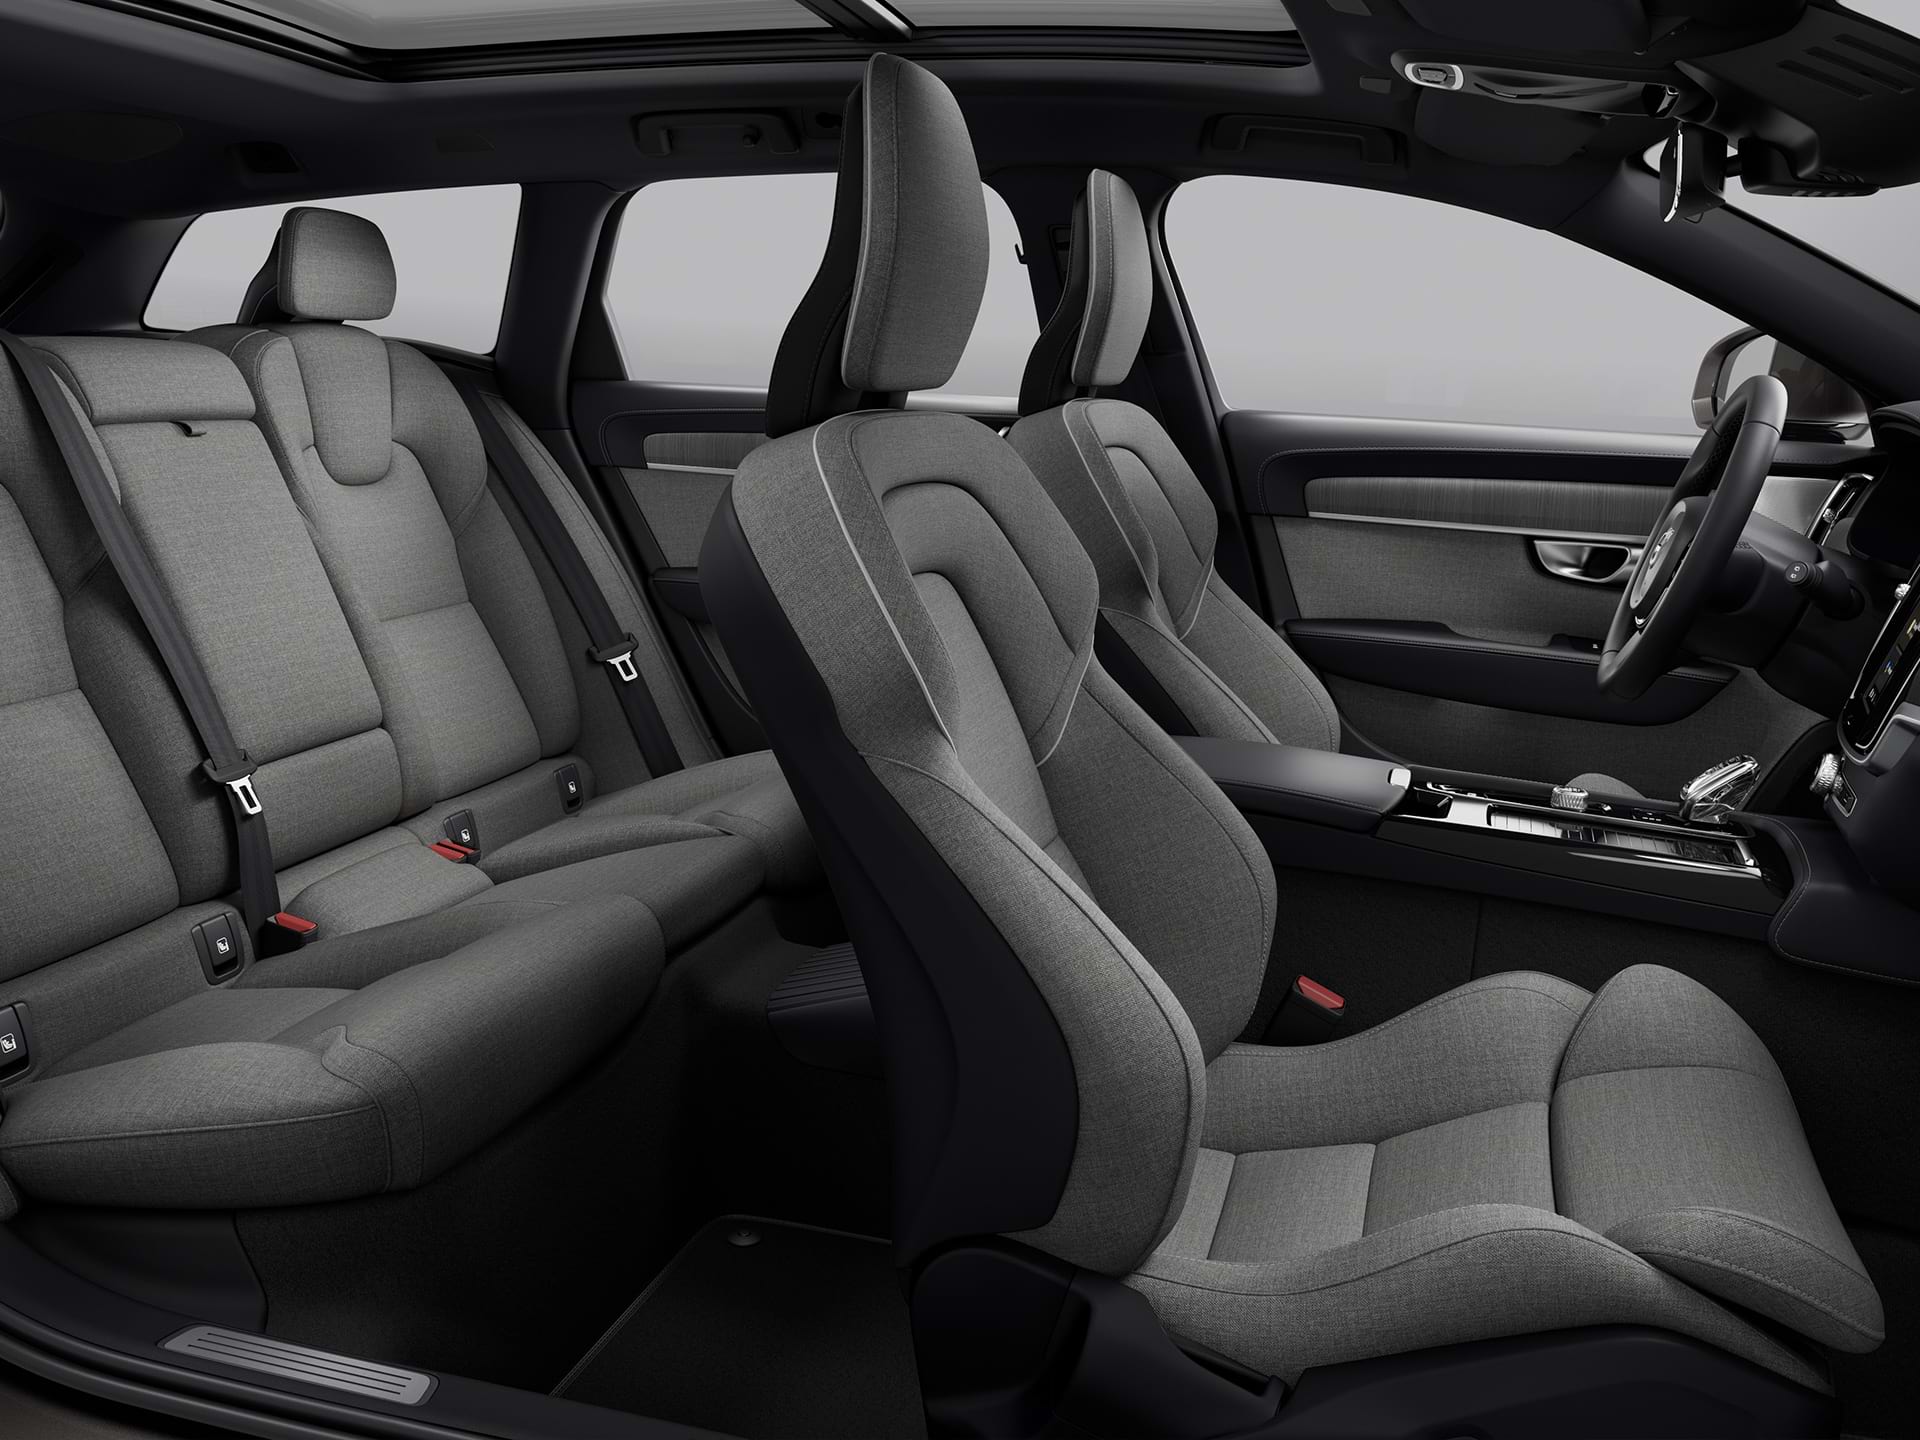 A wide-angle view of all four upholstered seats in the spacious cabin of a Volvo estate car.